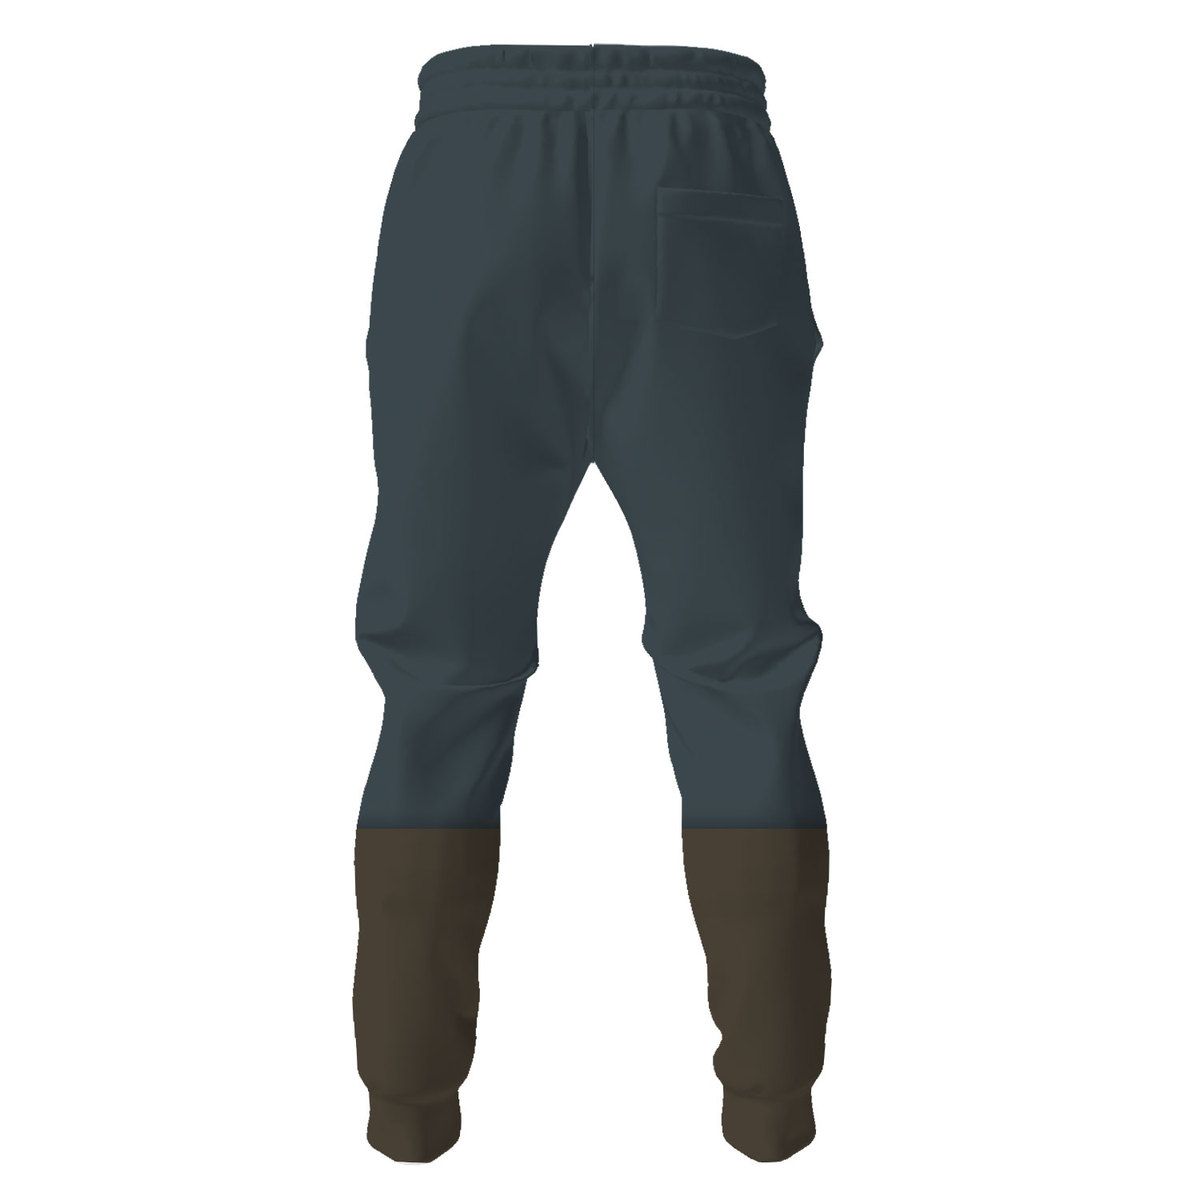 Soldier Blue Team TF2 pants